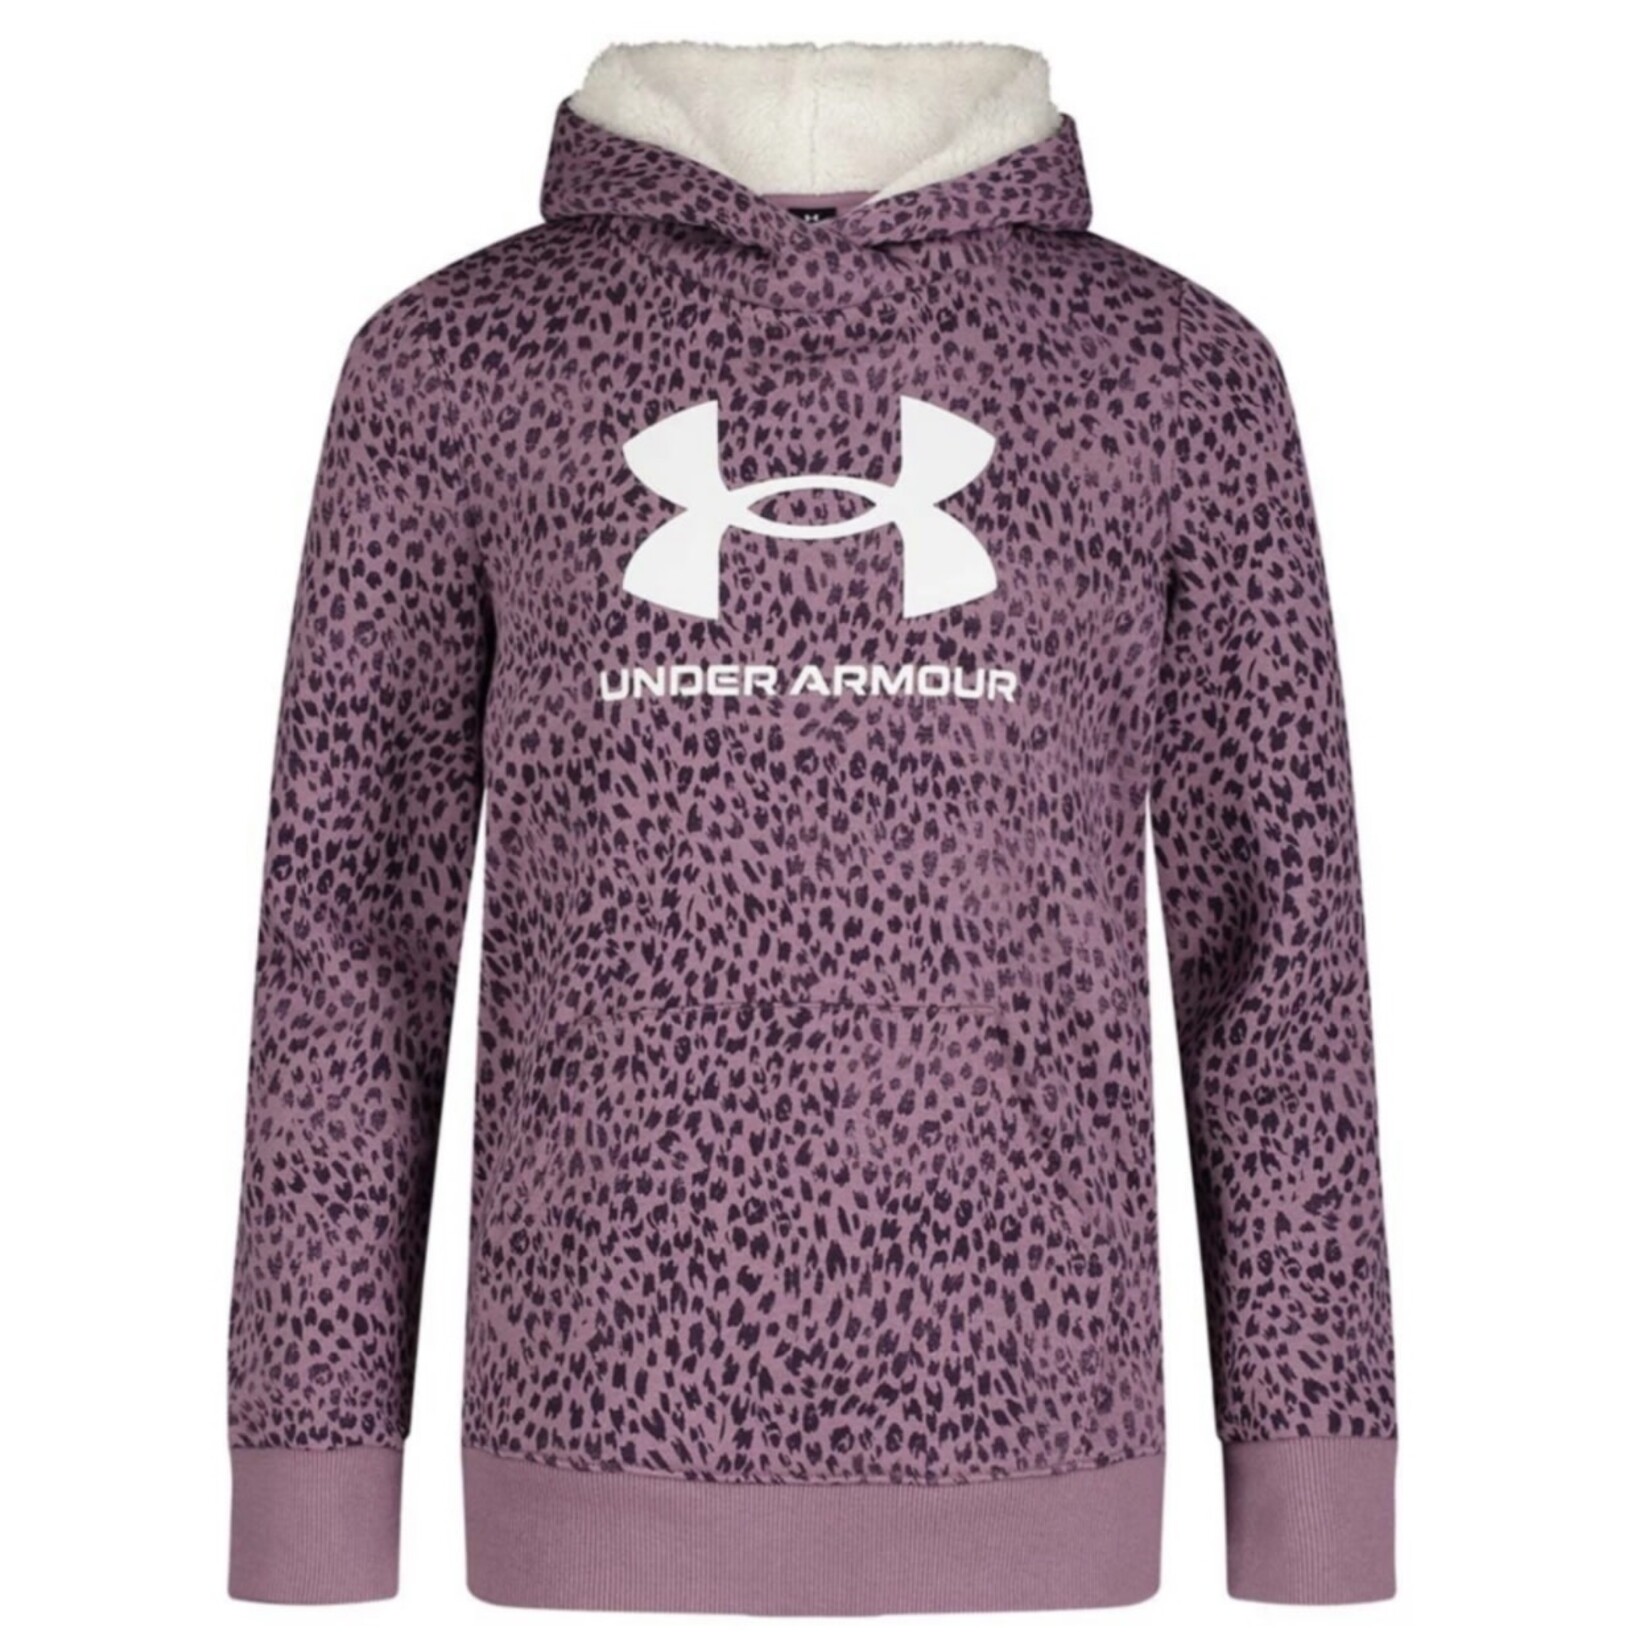 Under Armour Under Armour - Animal Scan Hoodie